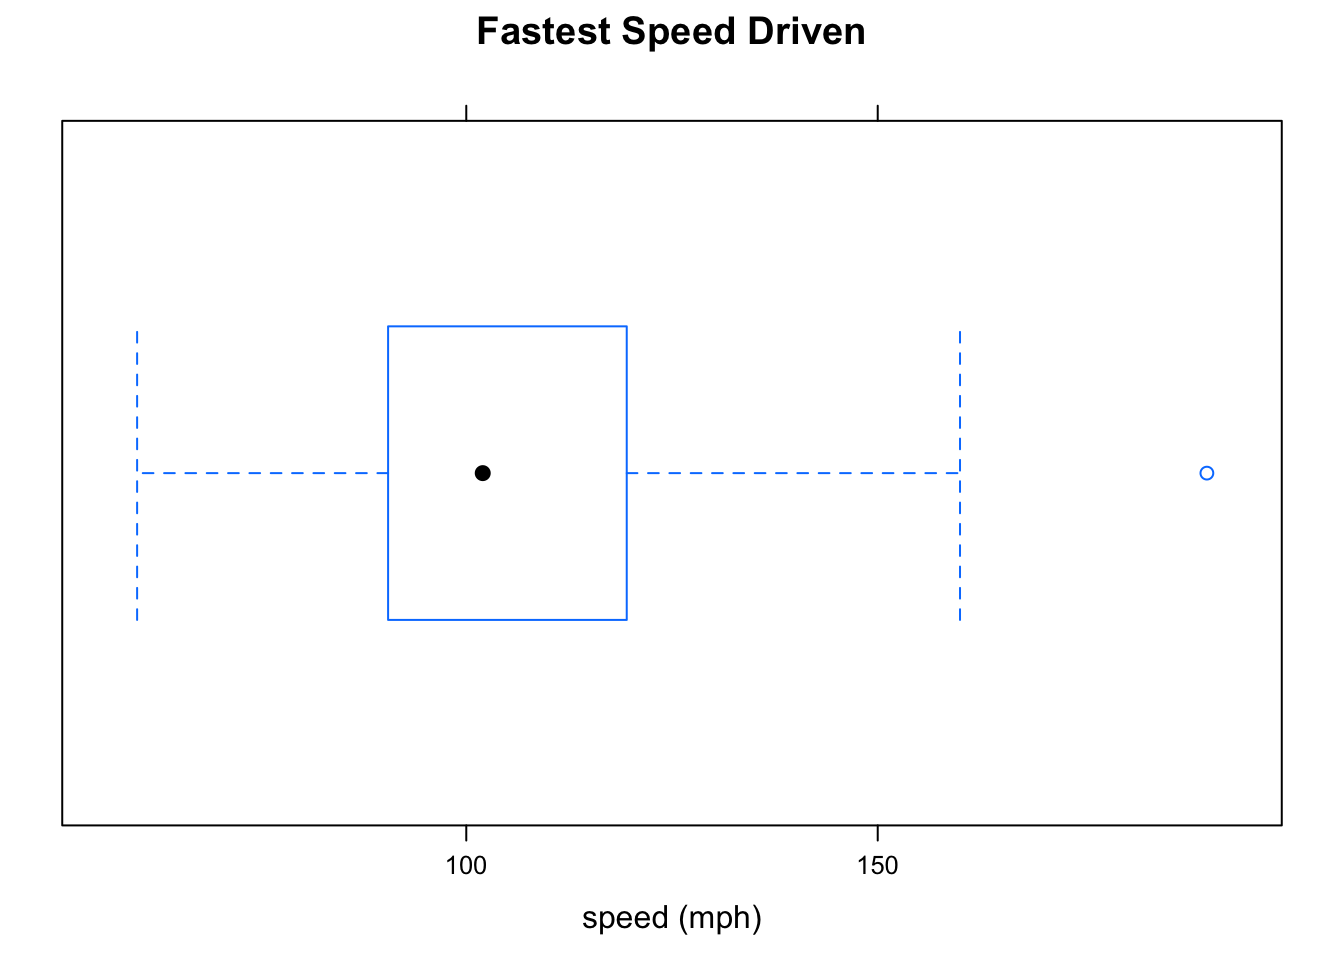 Boxplot Fastest.  The distribution is a little bit skewed to the right, and there is an oulier at about 190 mph.